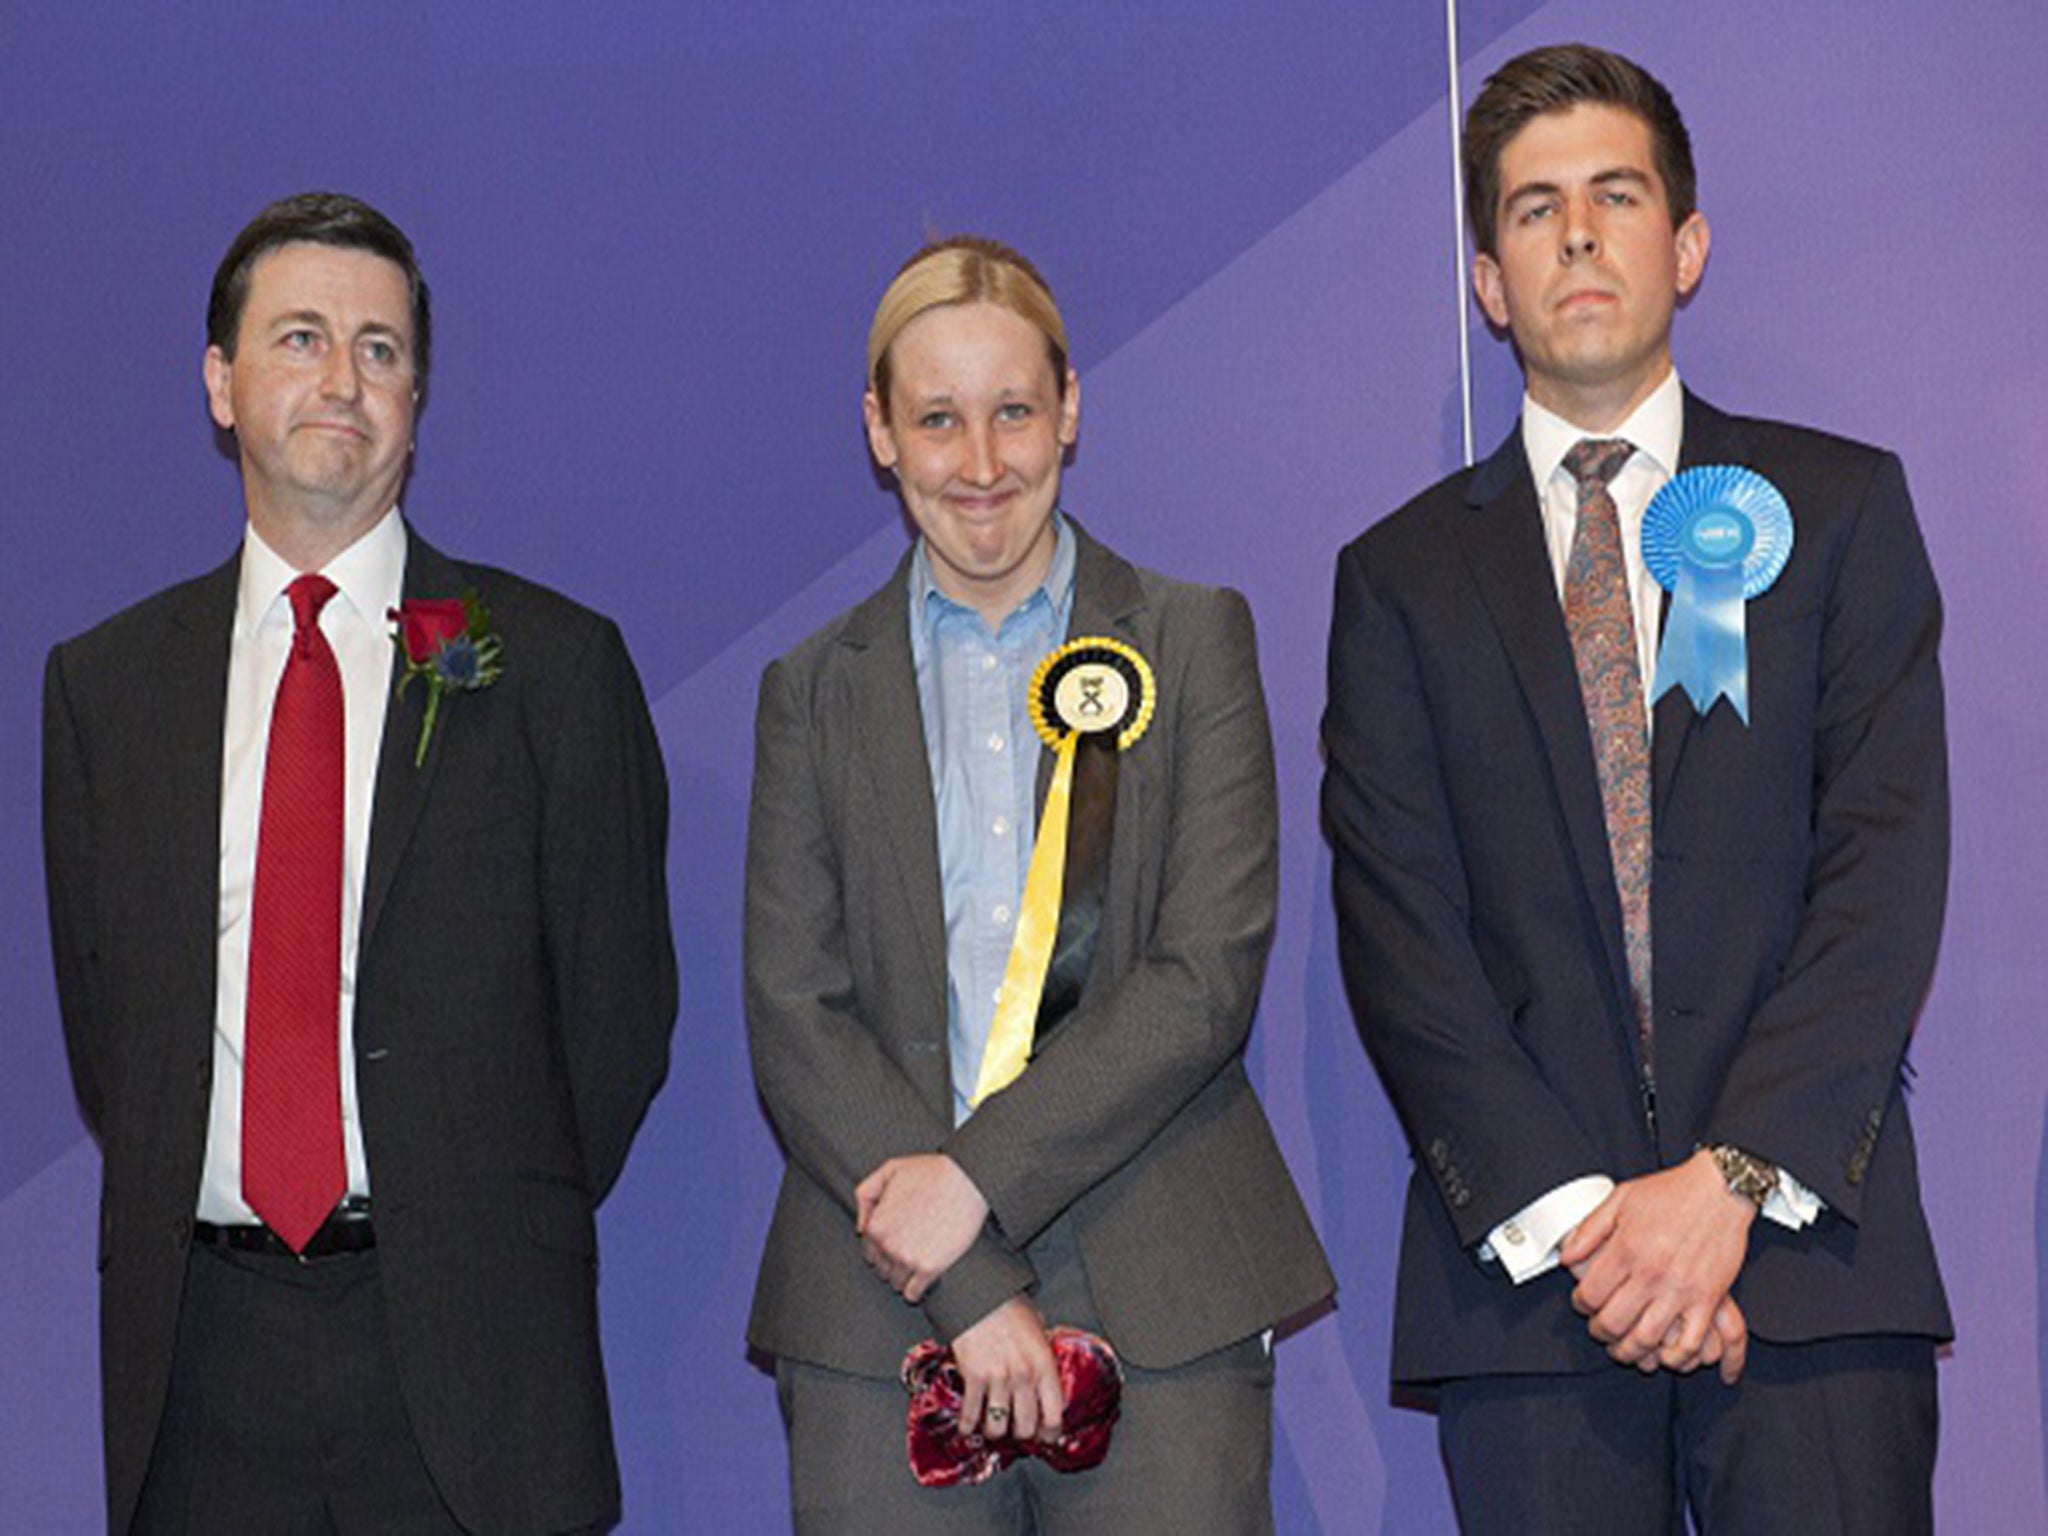 Newly elected Scottish National Party (SNP) member of parliament, Mhairi Black (C), Britain's youngest member of parliament since 1667, stands with Labour candidate Douglas Alexander (L) and Fraser Galloway, Conservative Candidate